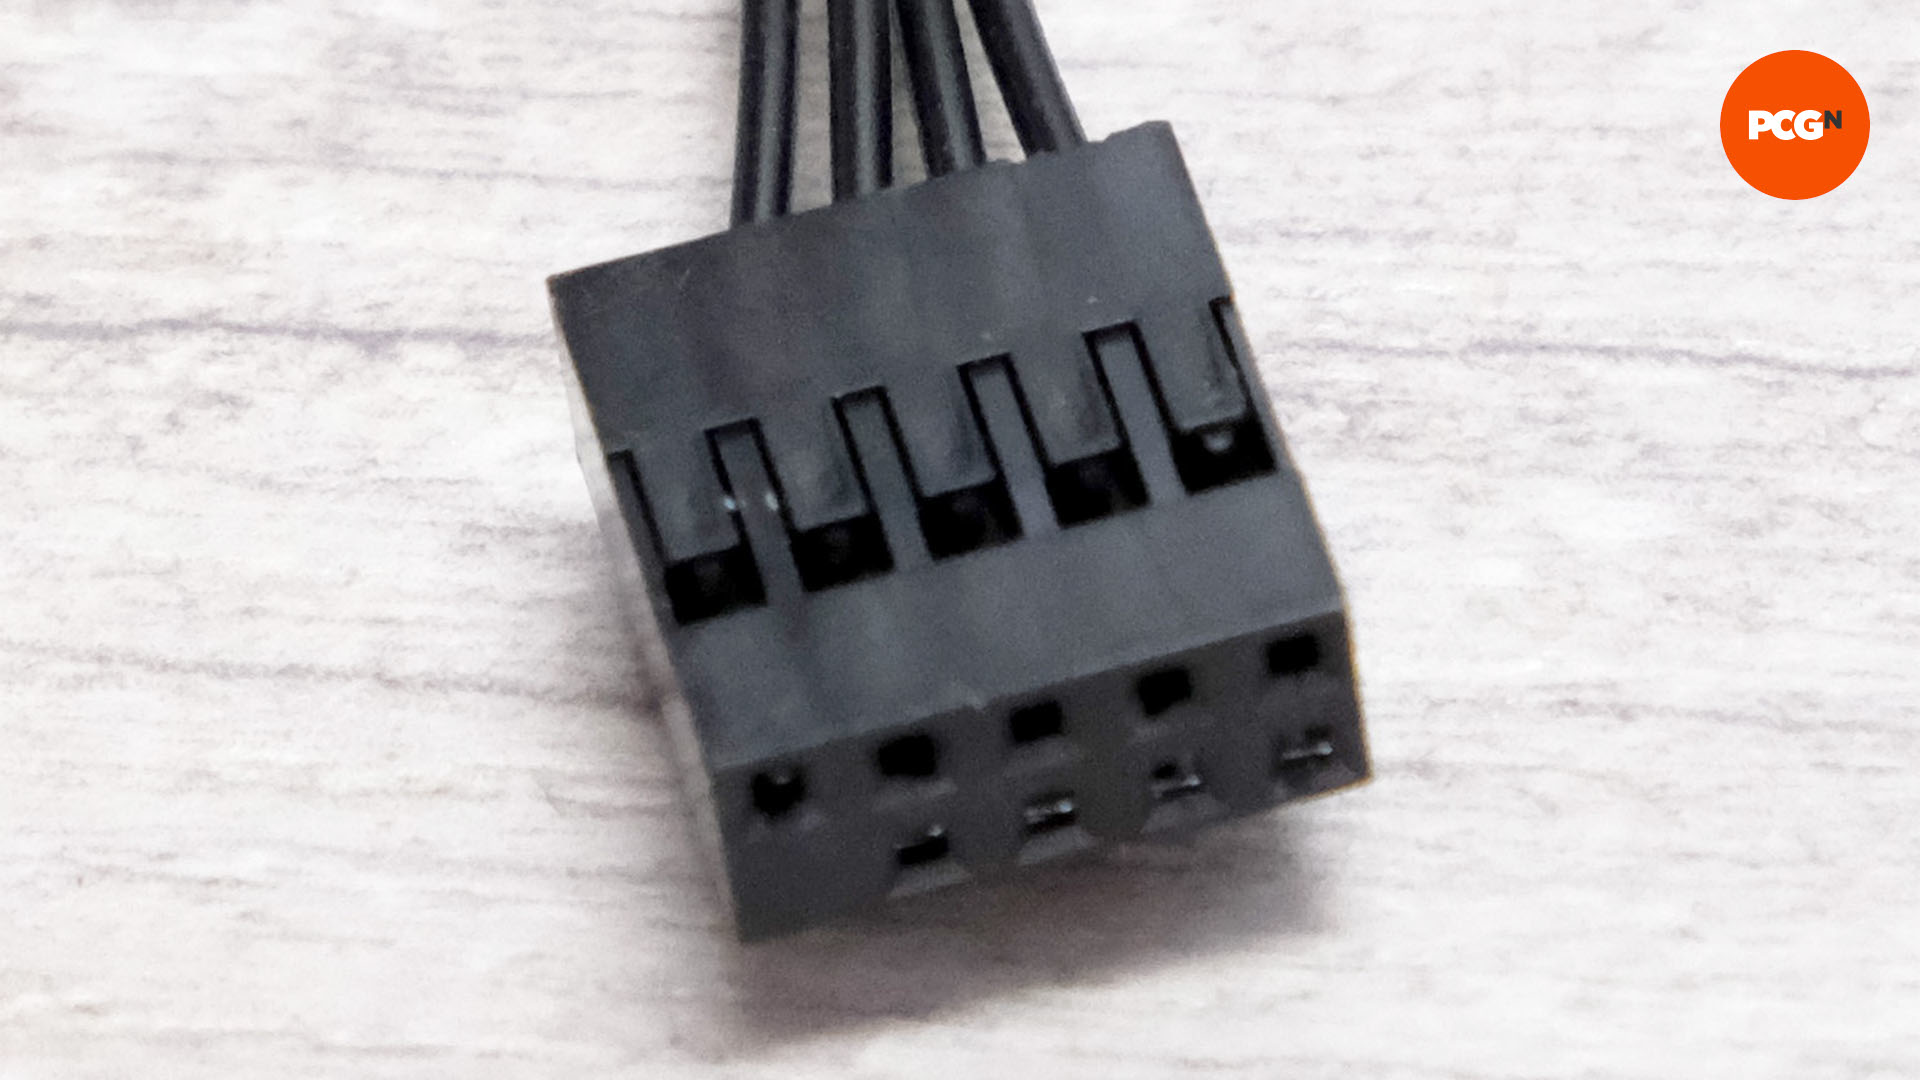 A USB 2 plug for the motherboard